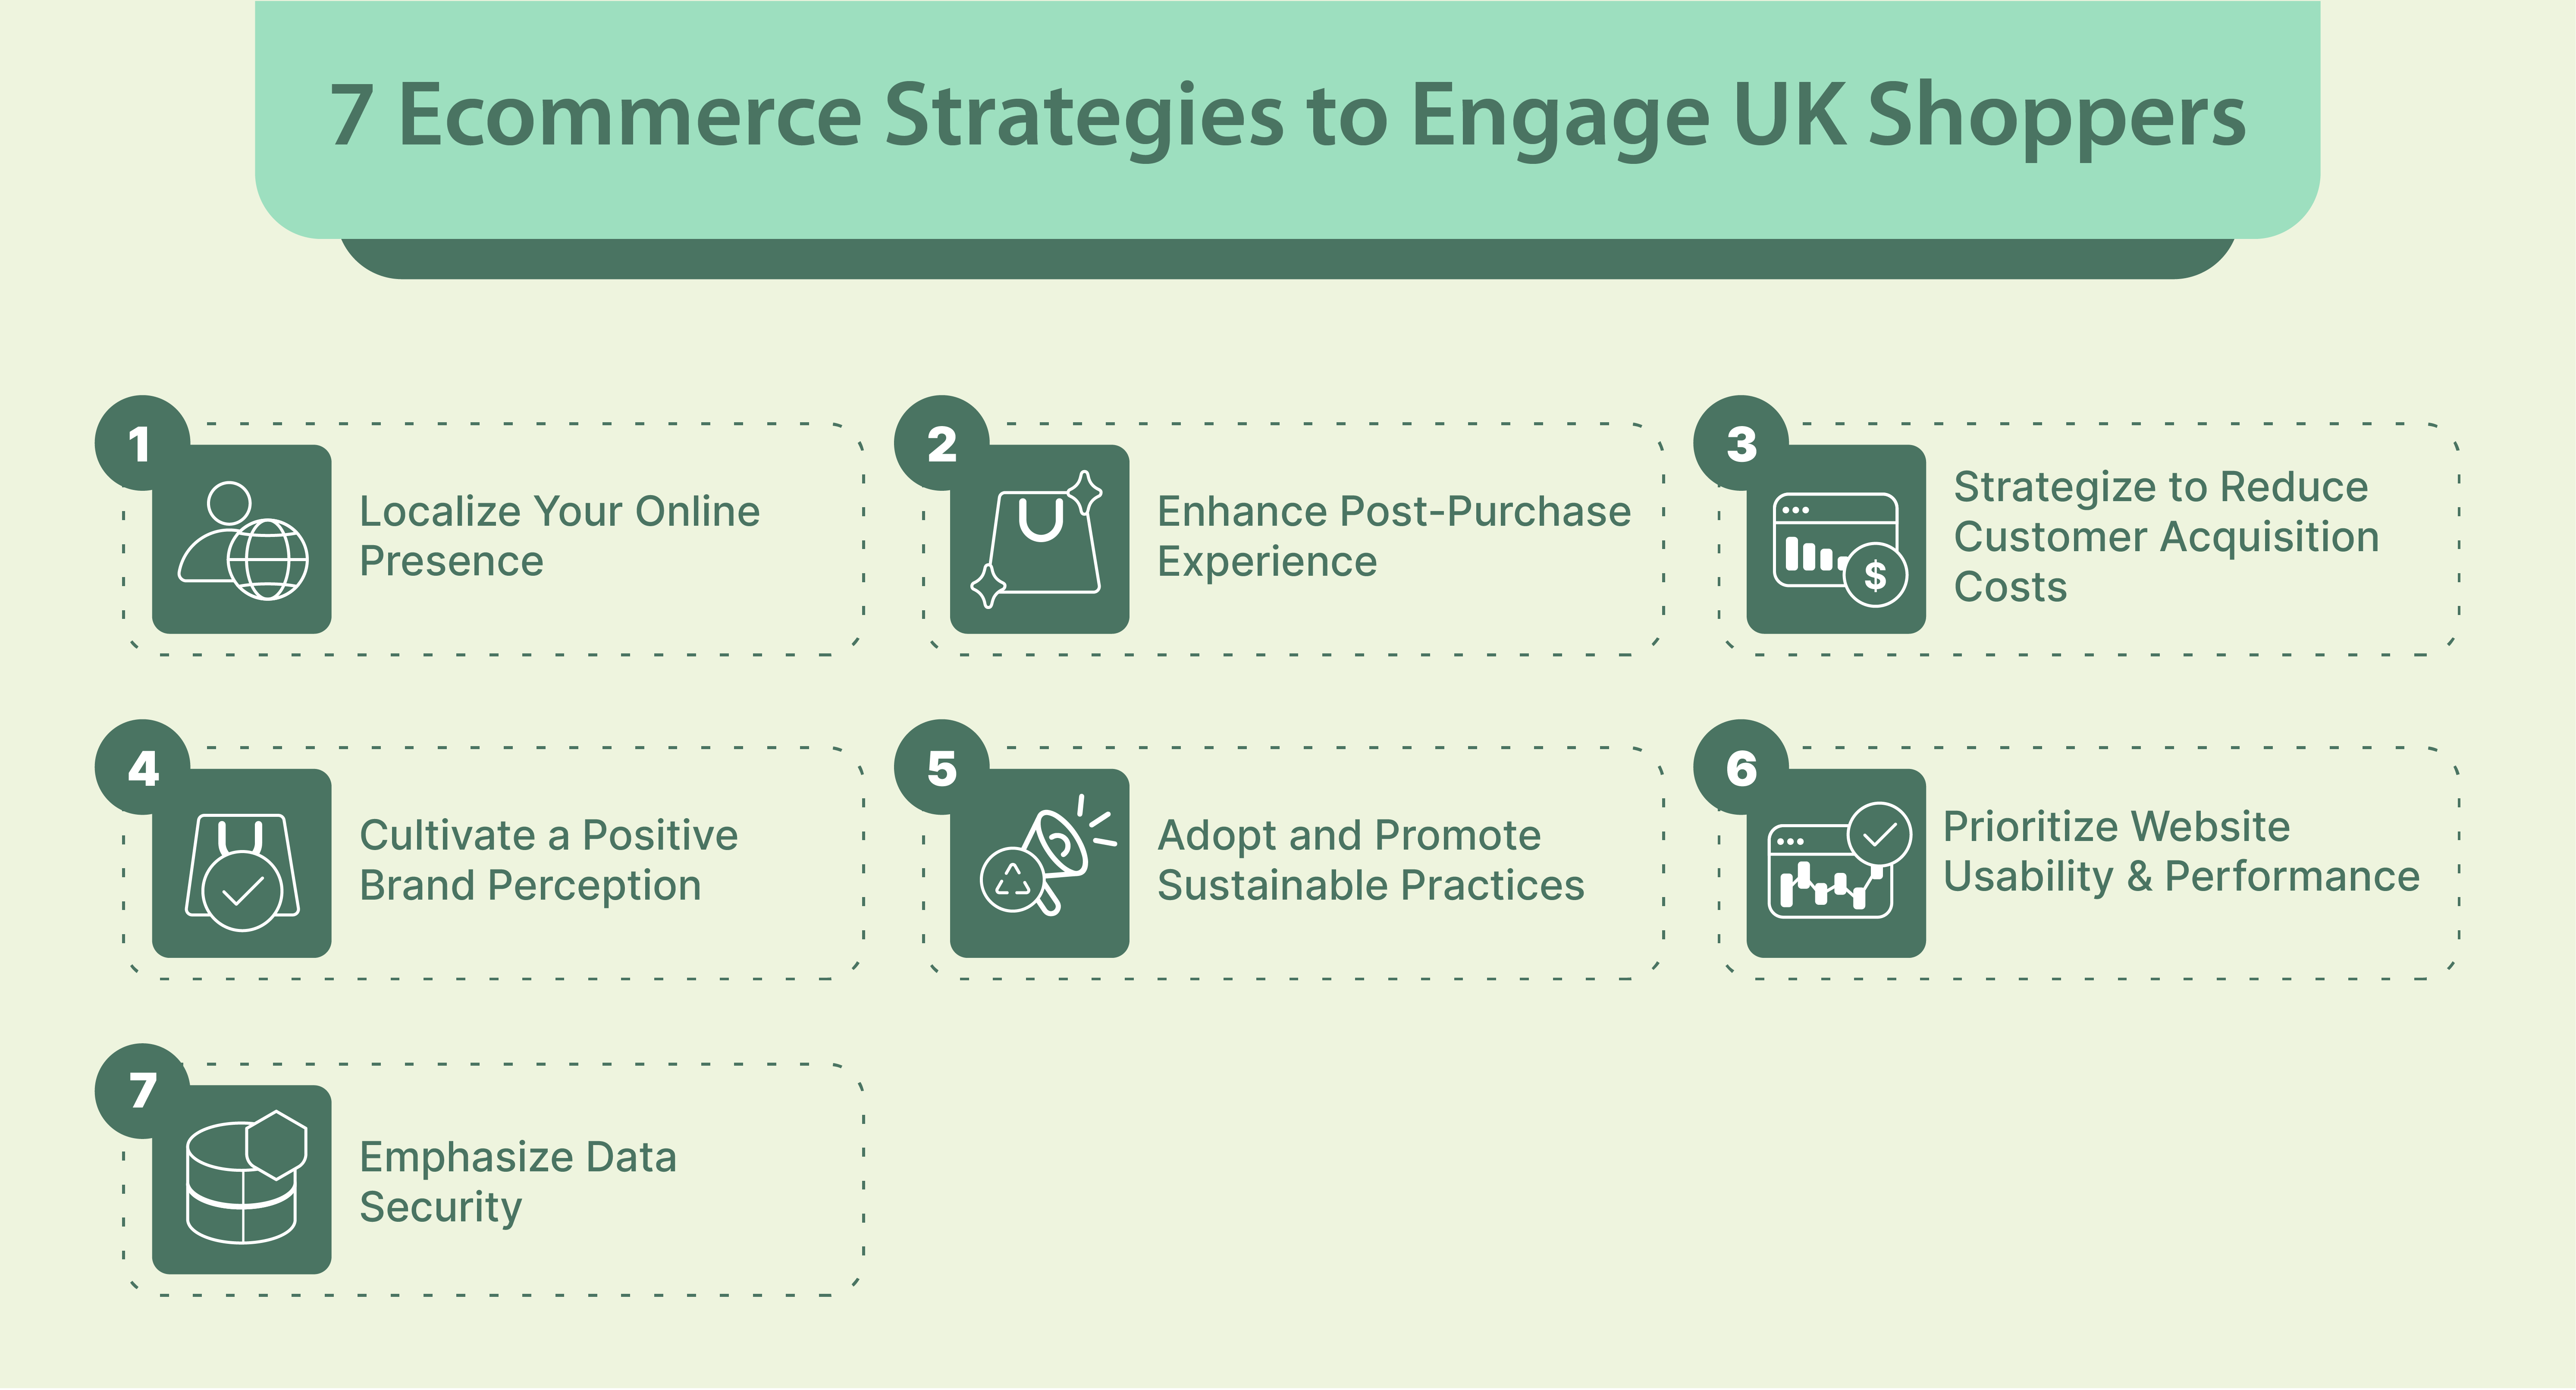 7 key ecommerce strategies for engaging UK shoppers on Magento platforms